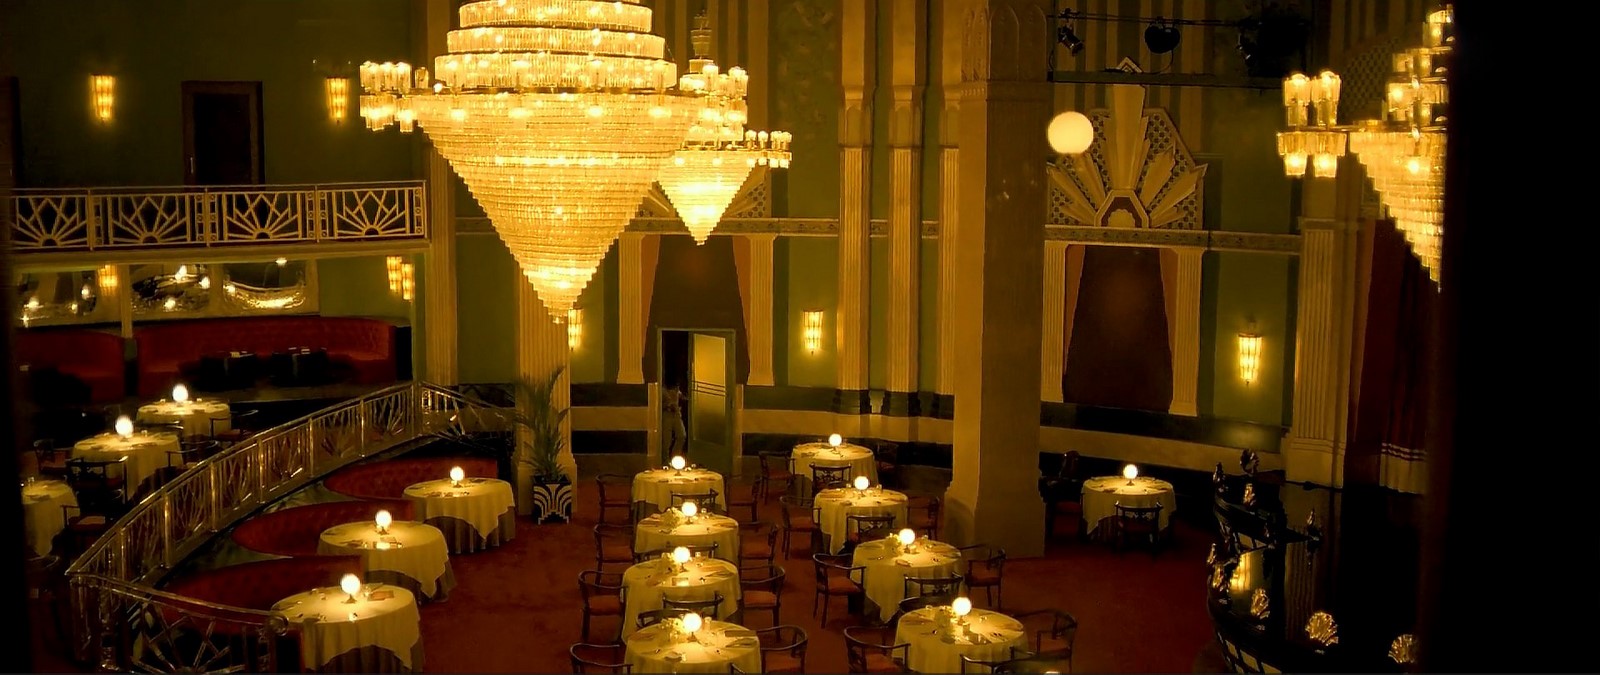 An architectural review of Bombay Velvet - Sheet18